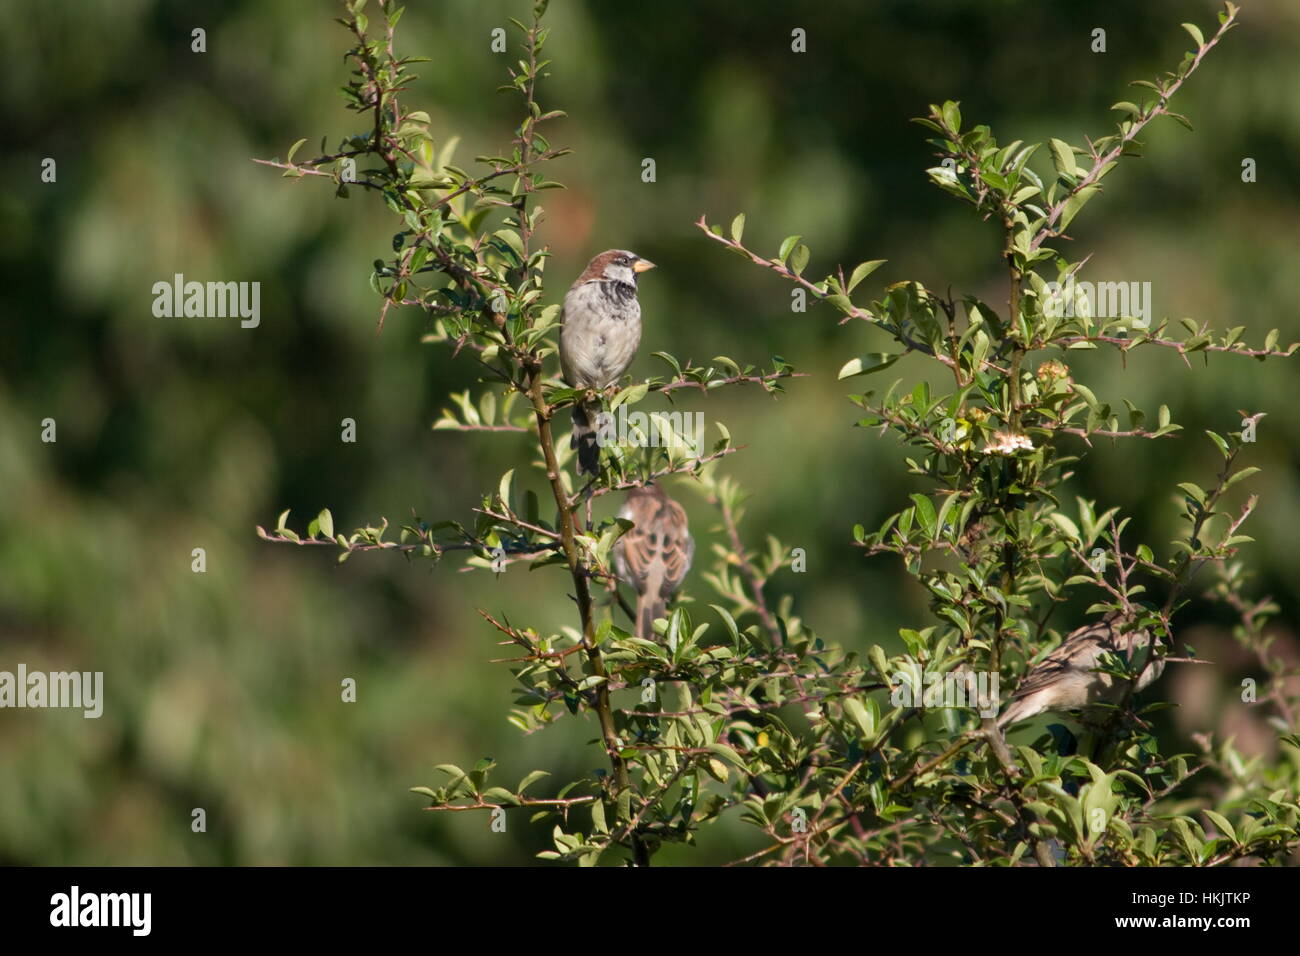 Sparrows Passer domesticus on branches. Stock Photo